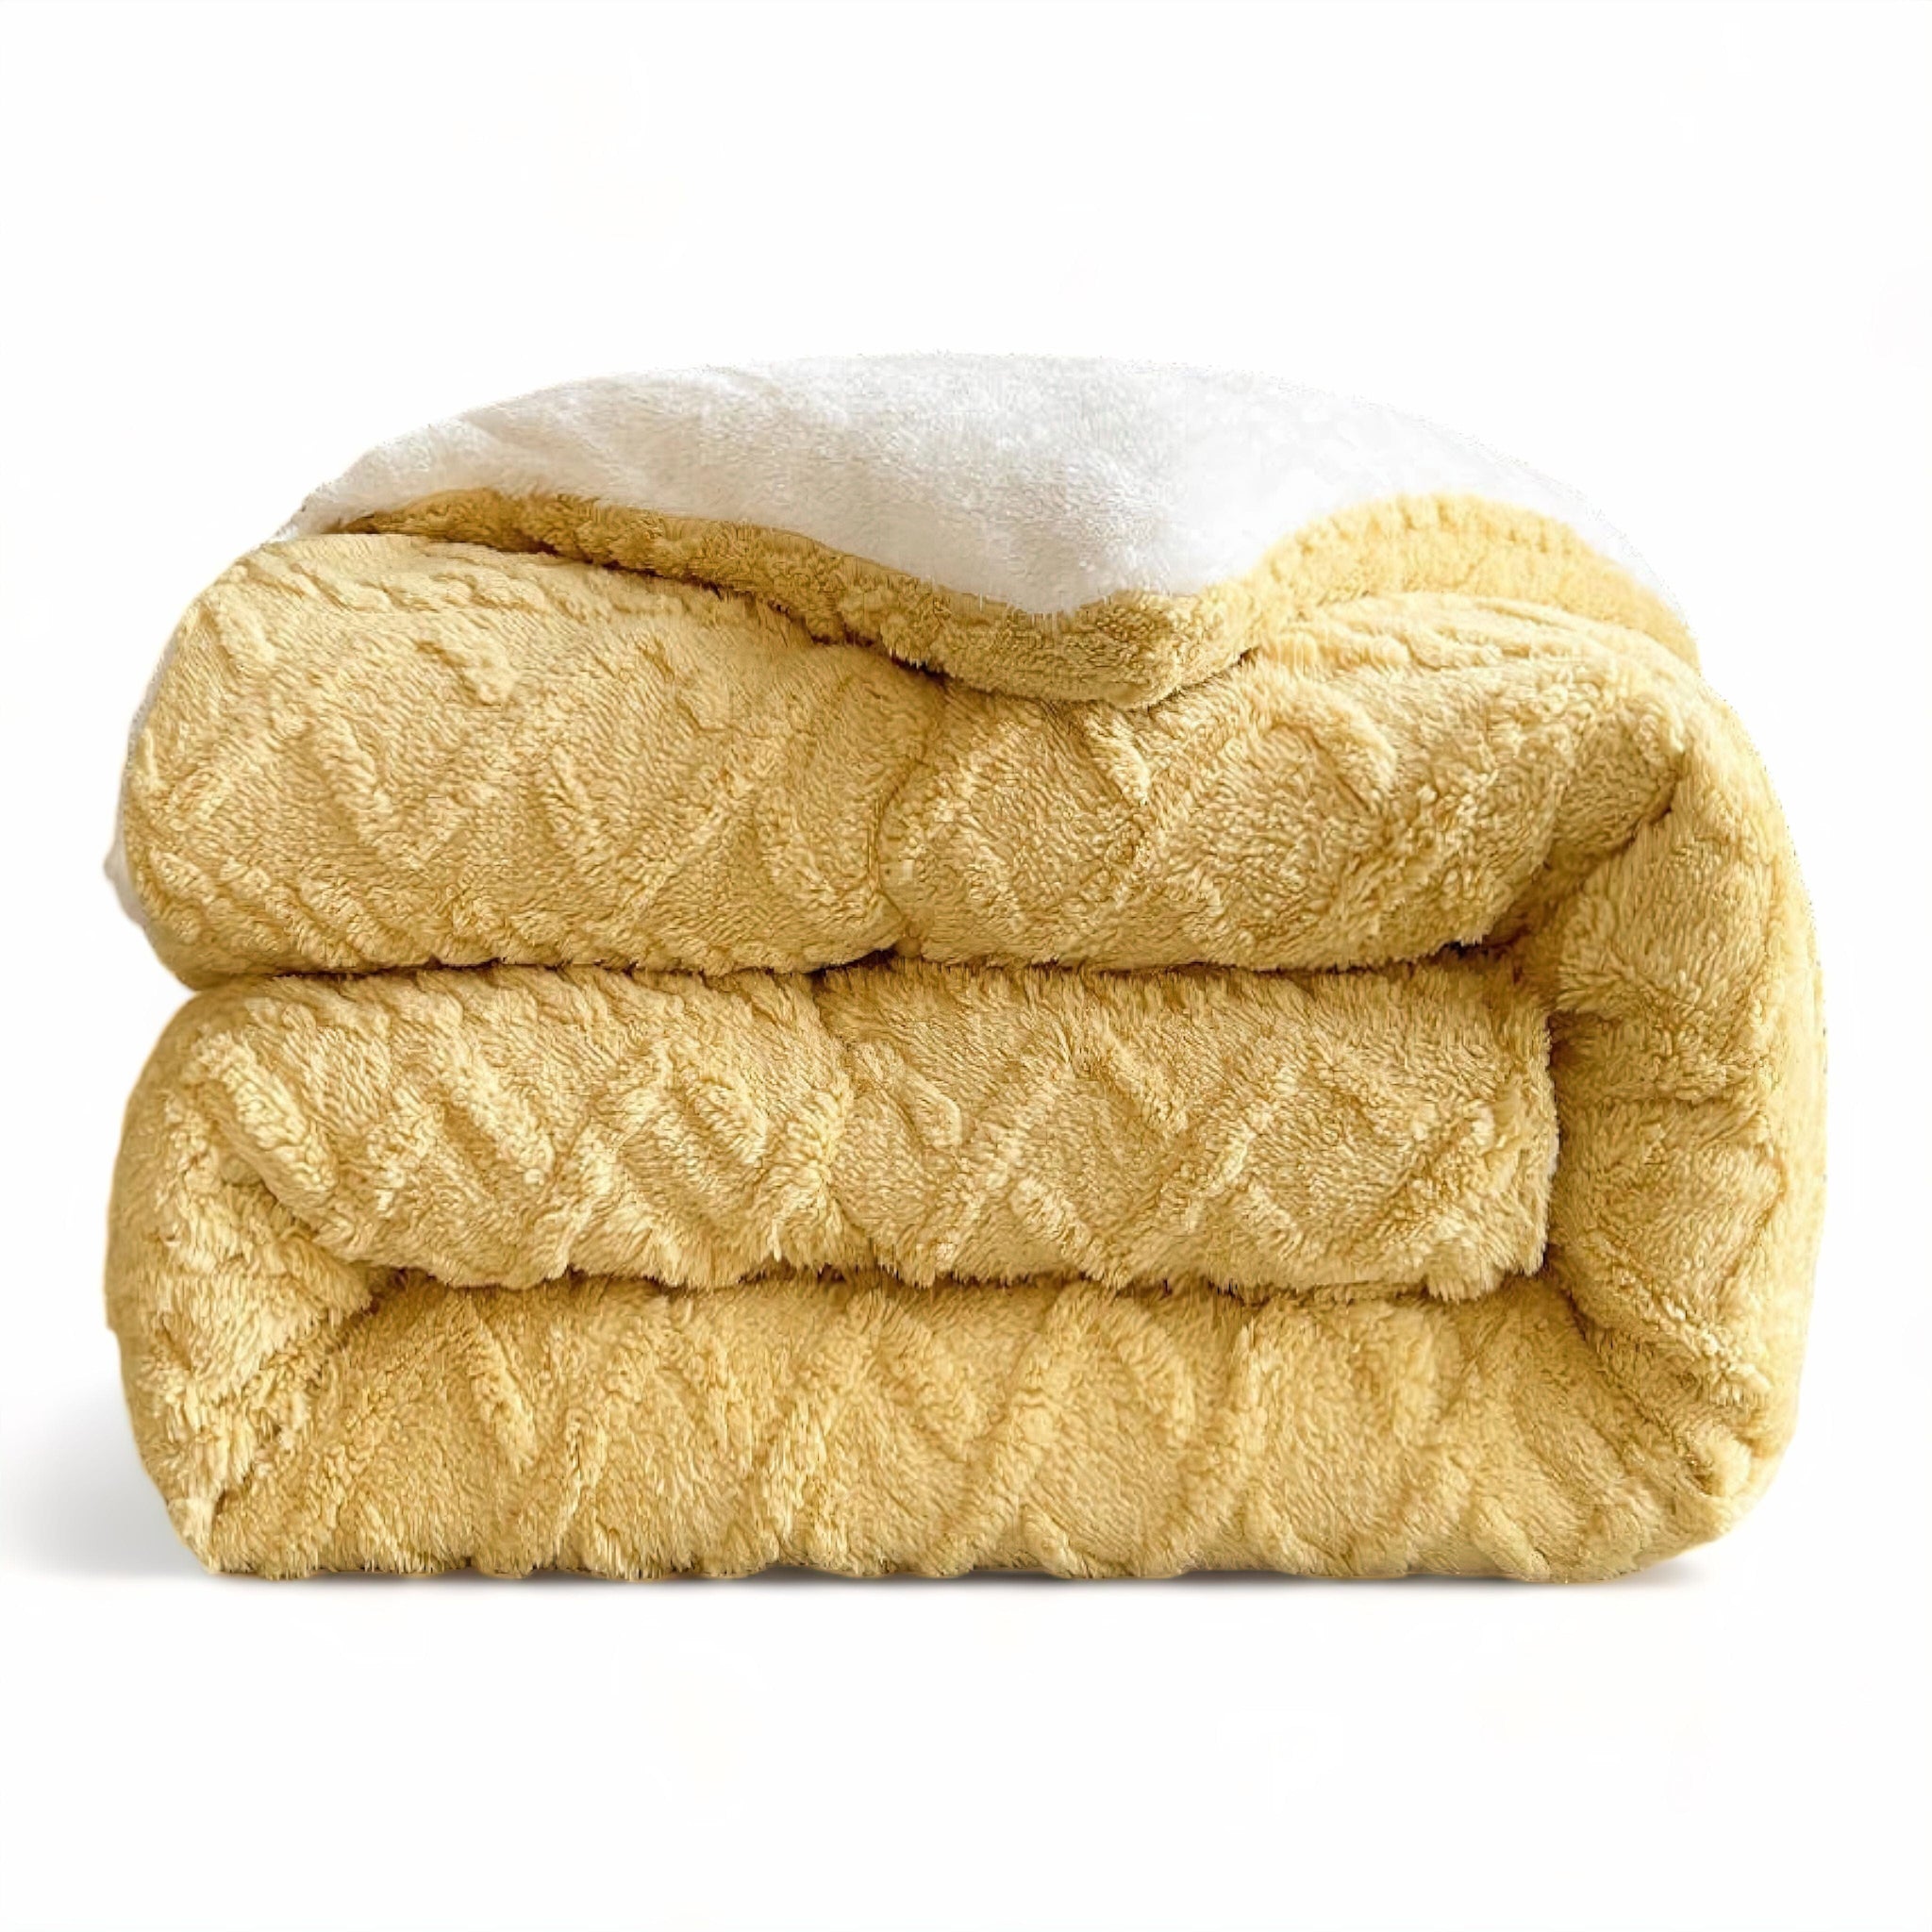 Marcella Ultra Thick Blanket Yellow 150 x 200cm (2kg) 